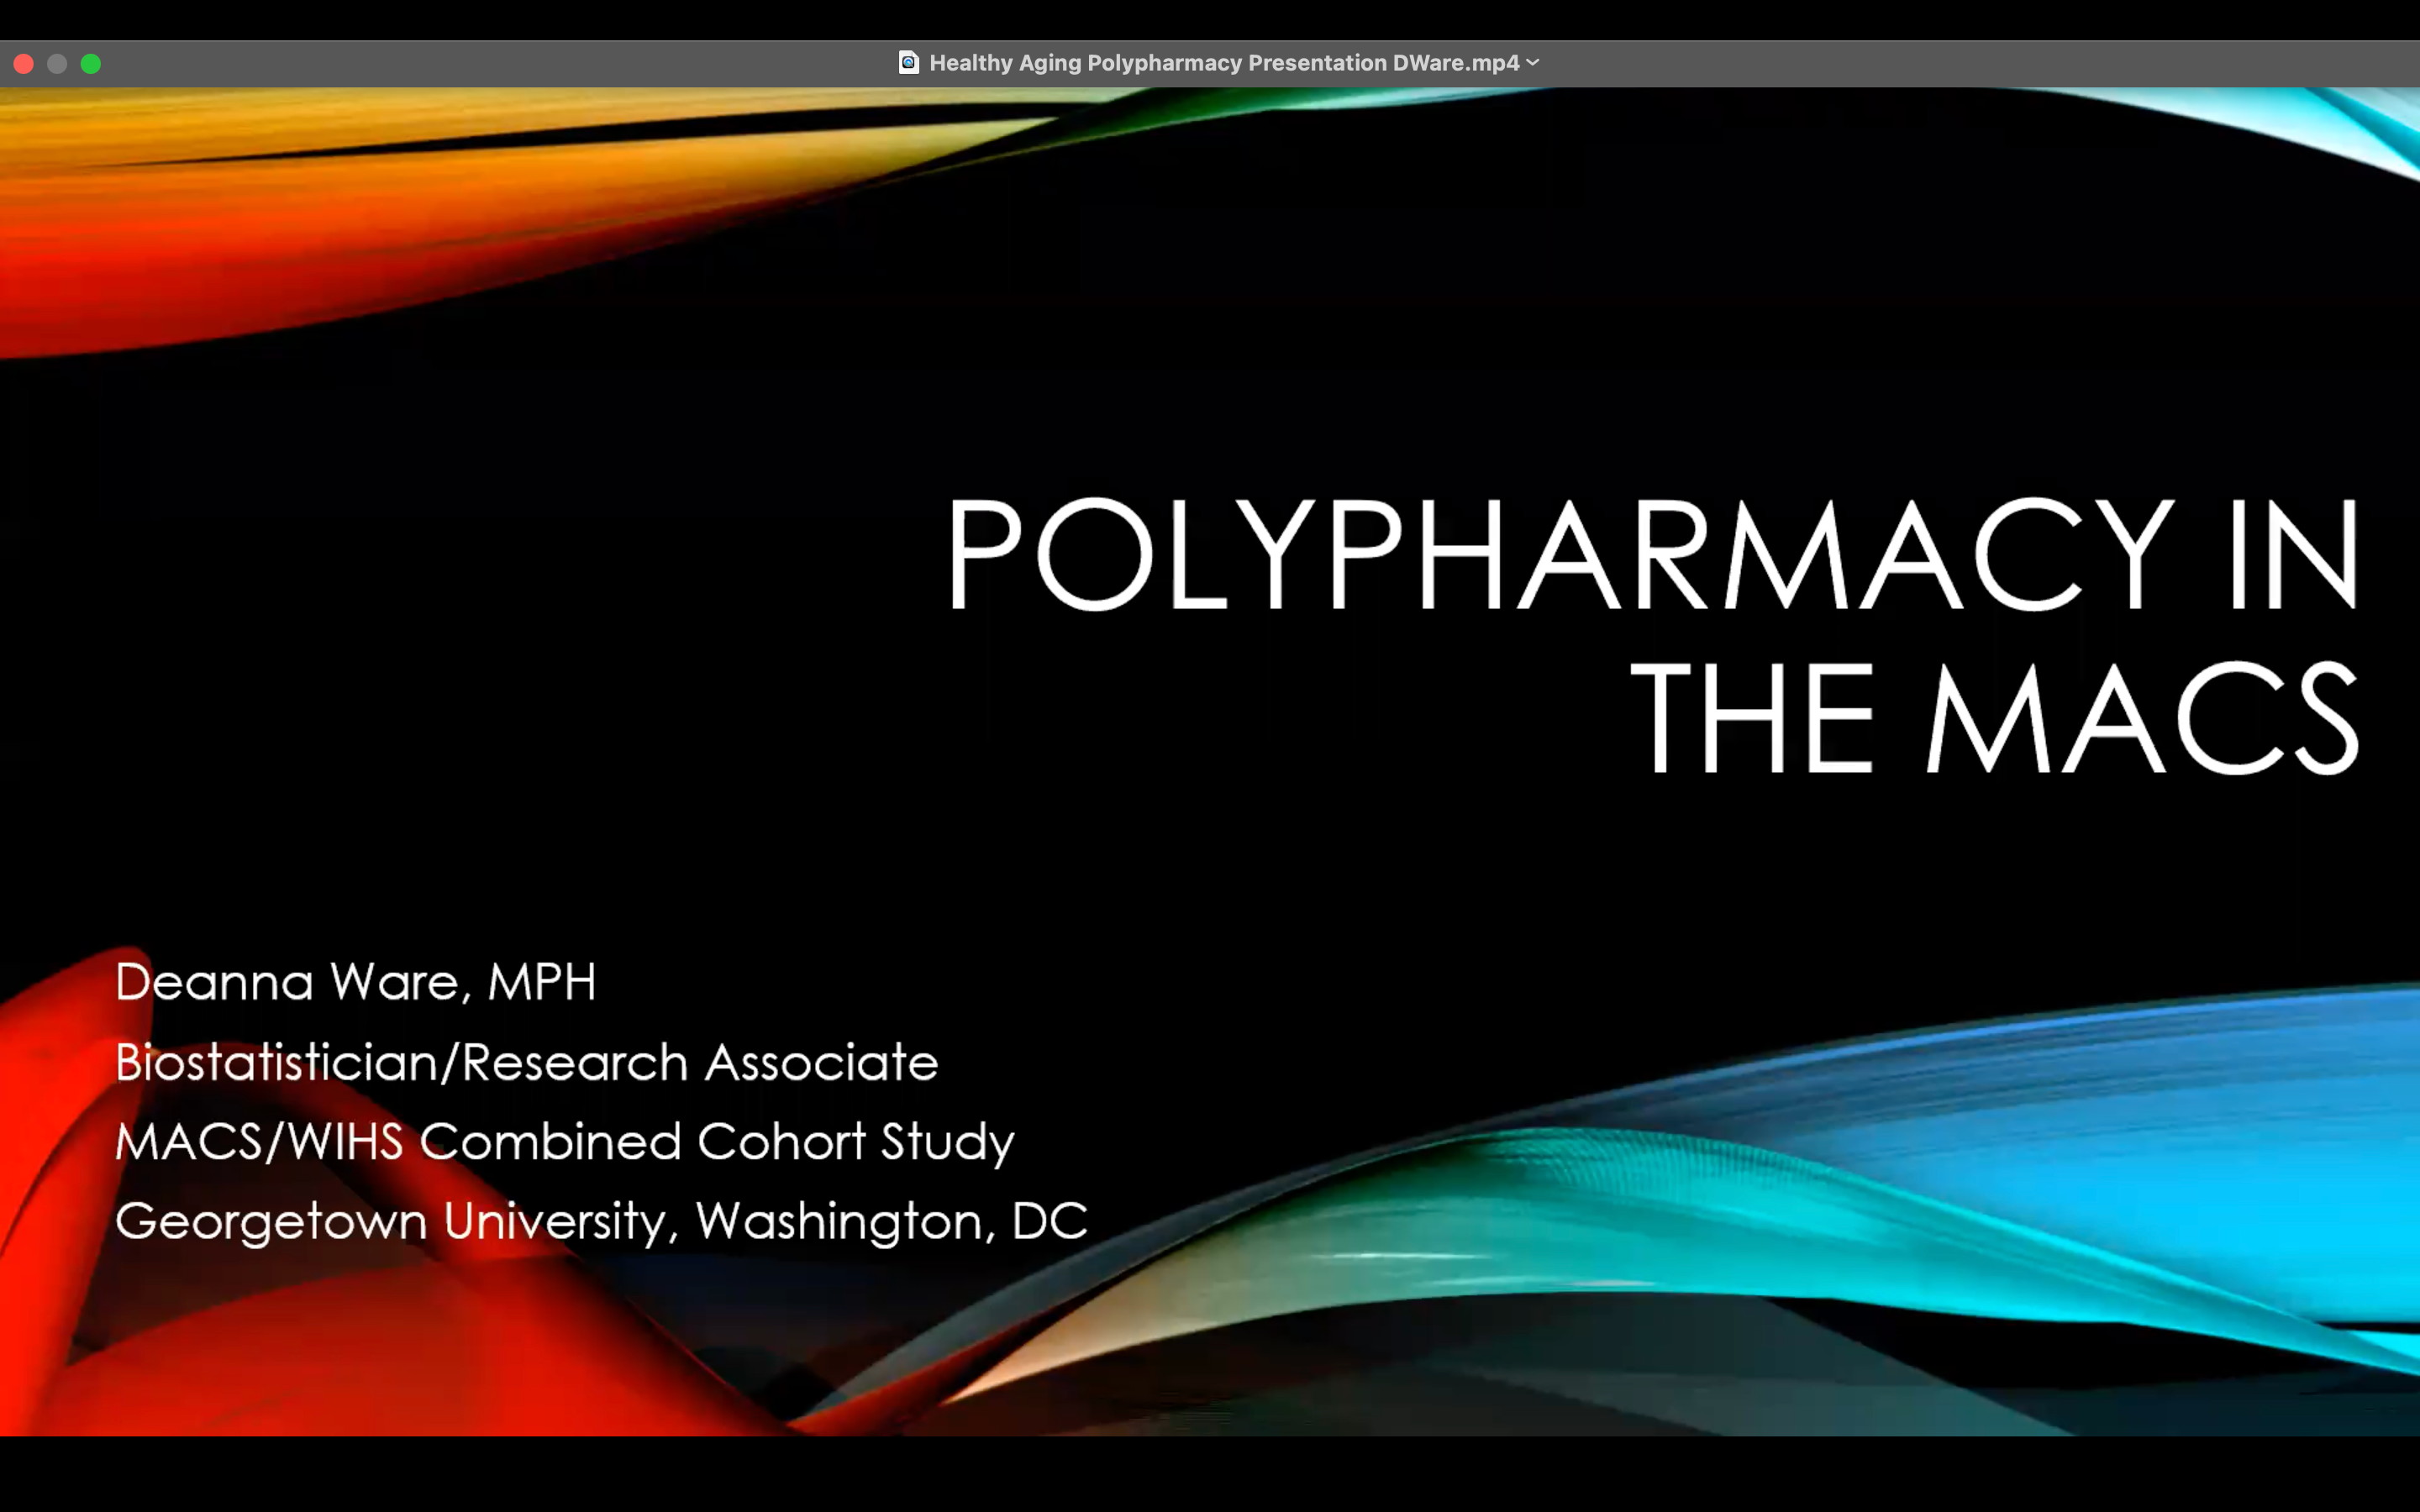 A presentation with a colorful border on a black background, with the title of the video in white lettering